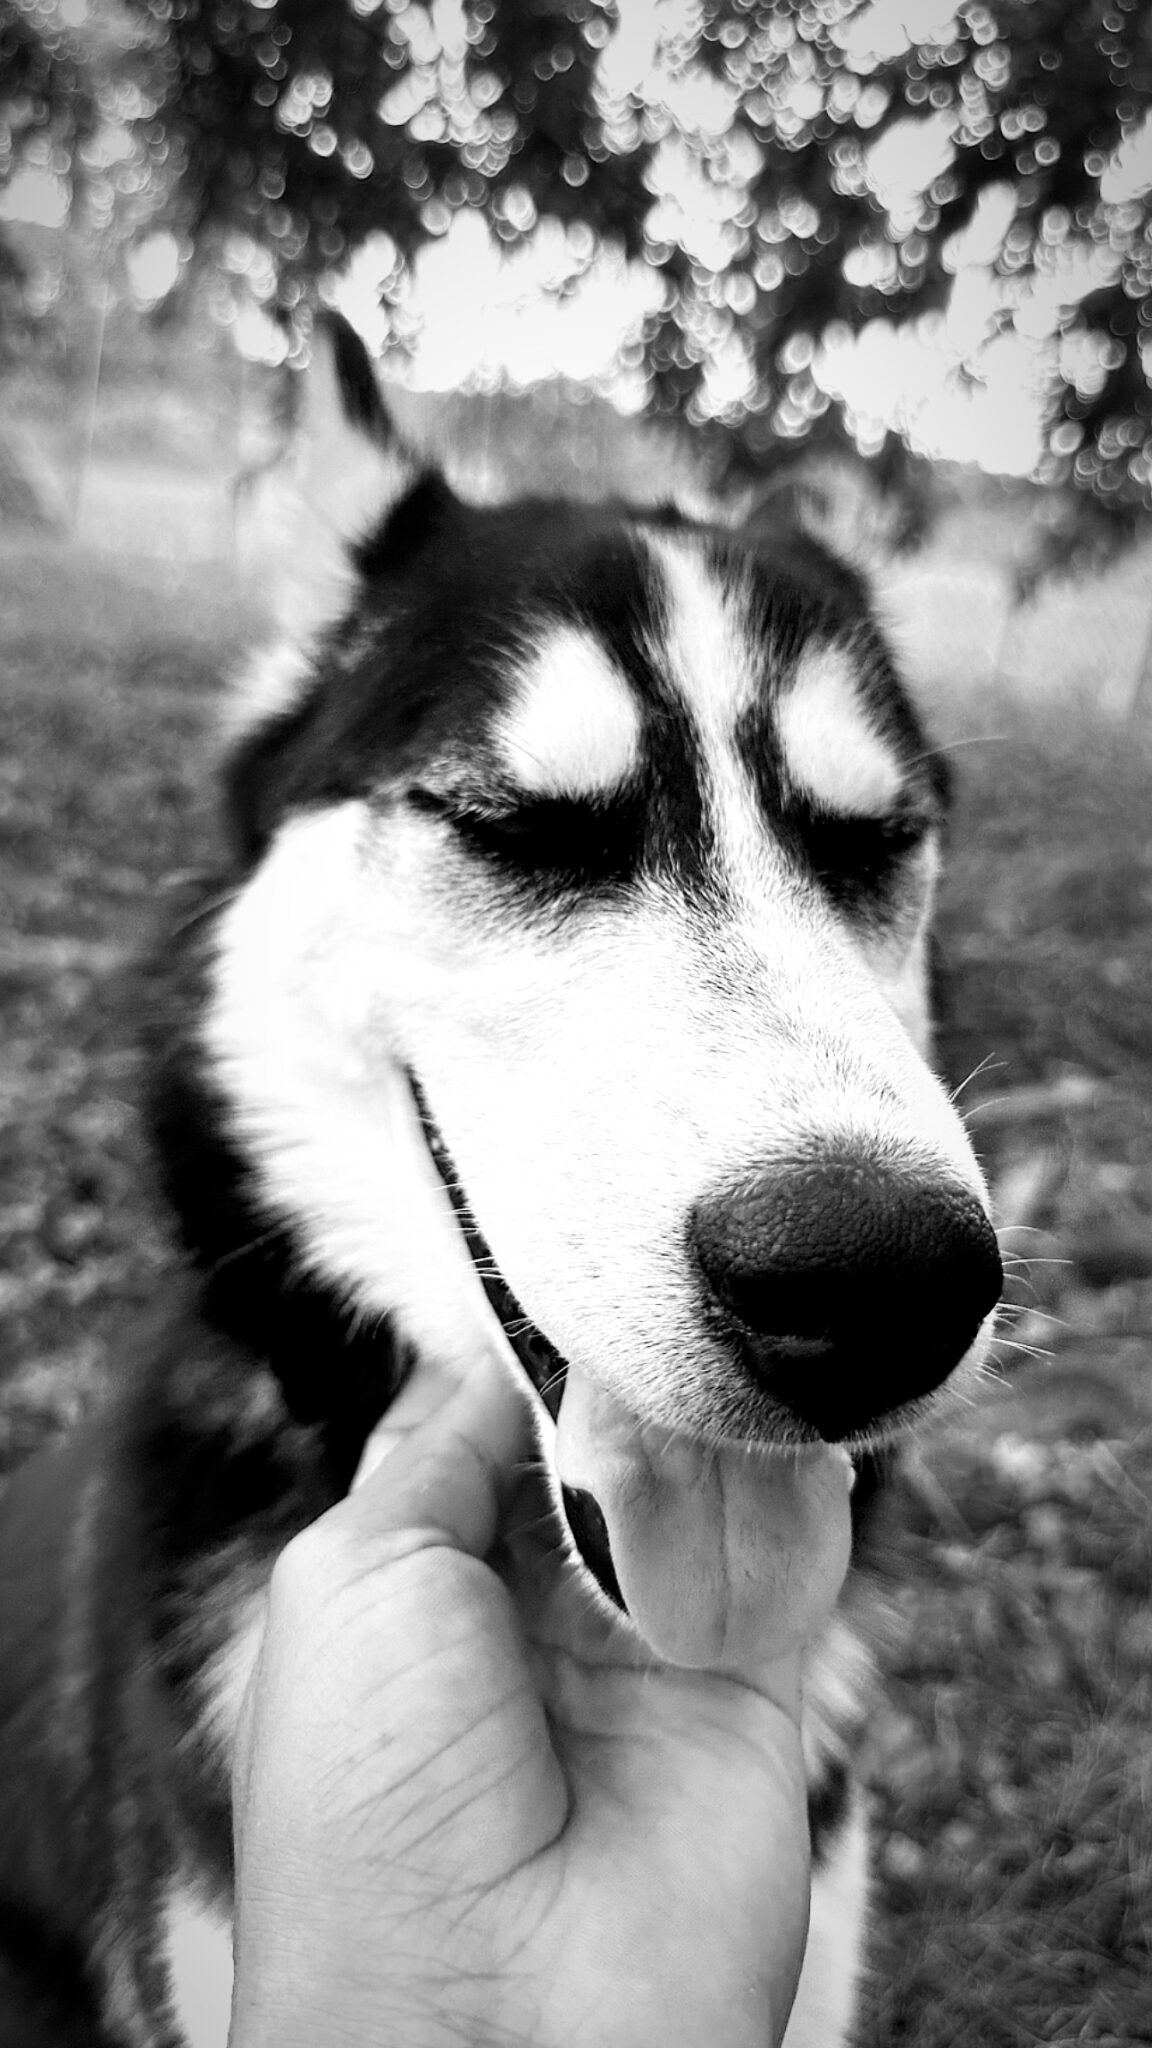 A black and white photo of a dog outside, being petted underneath its chin. The dog looks very happy.